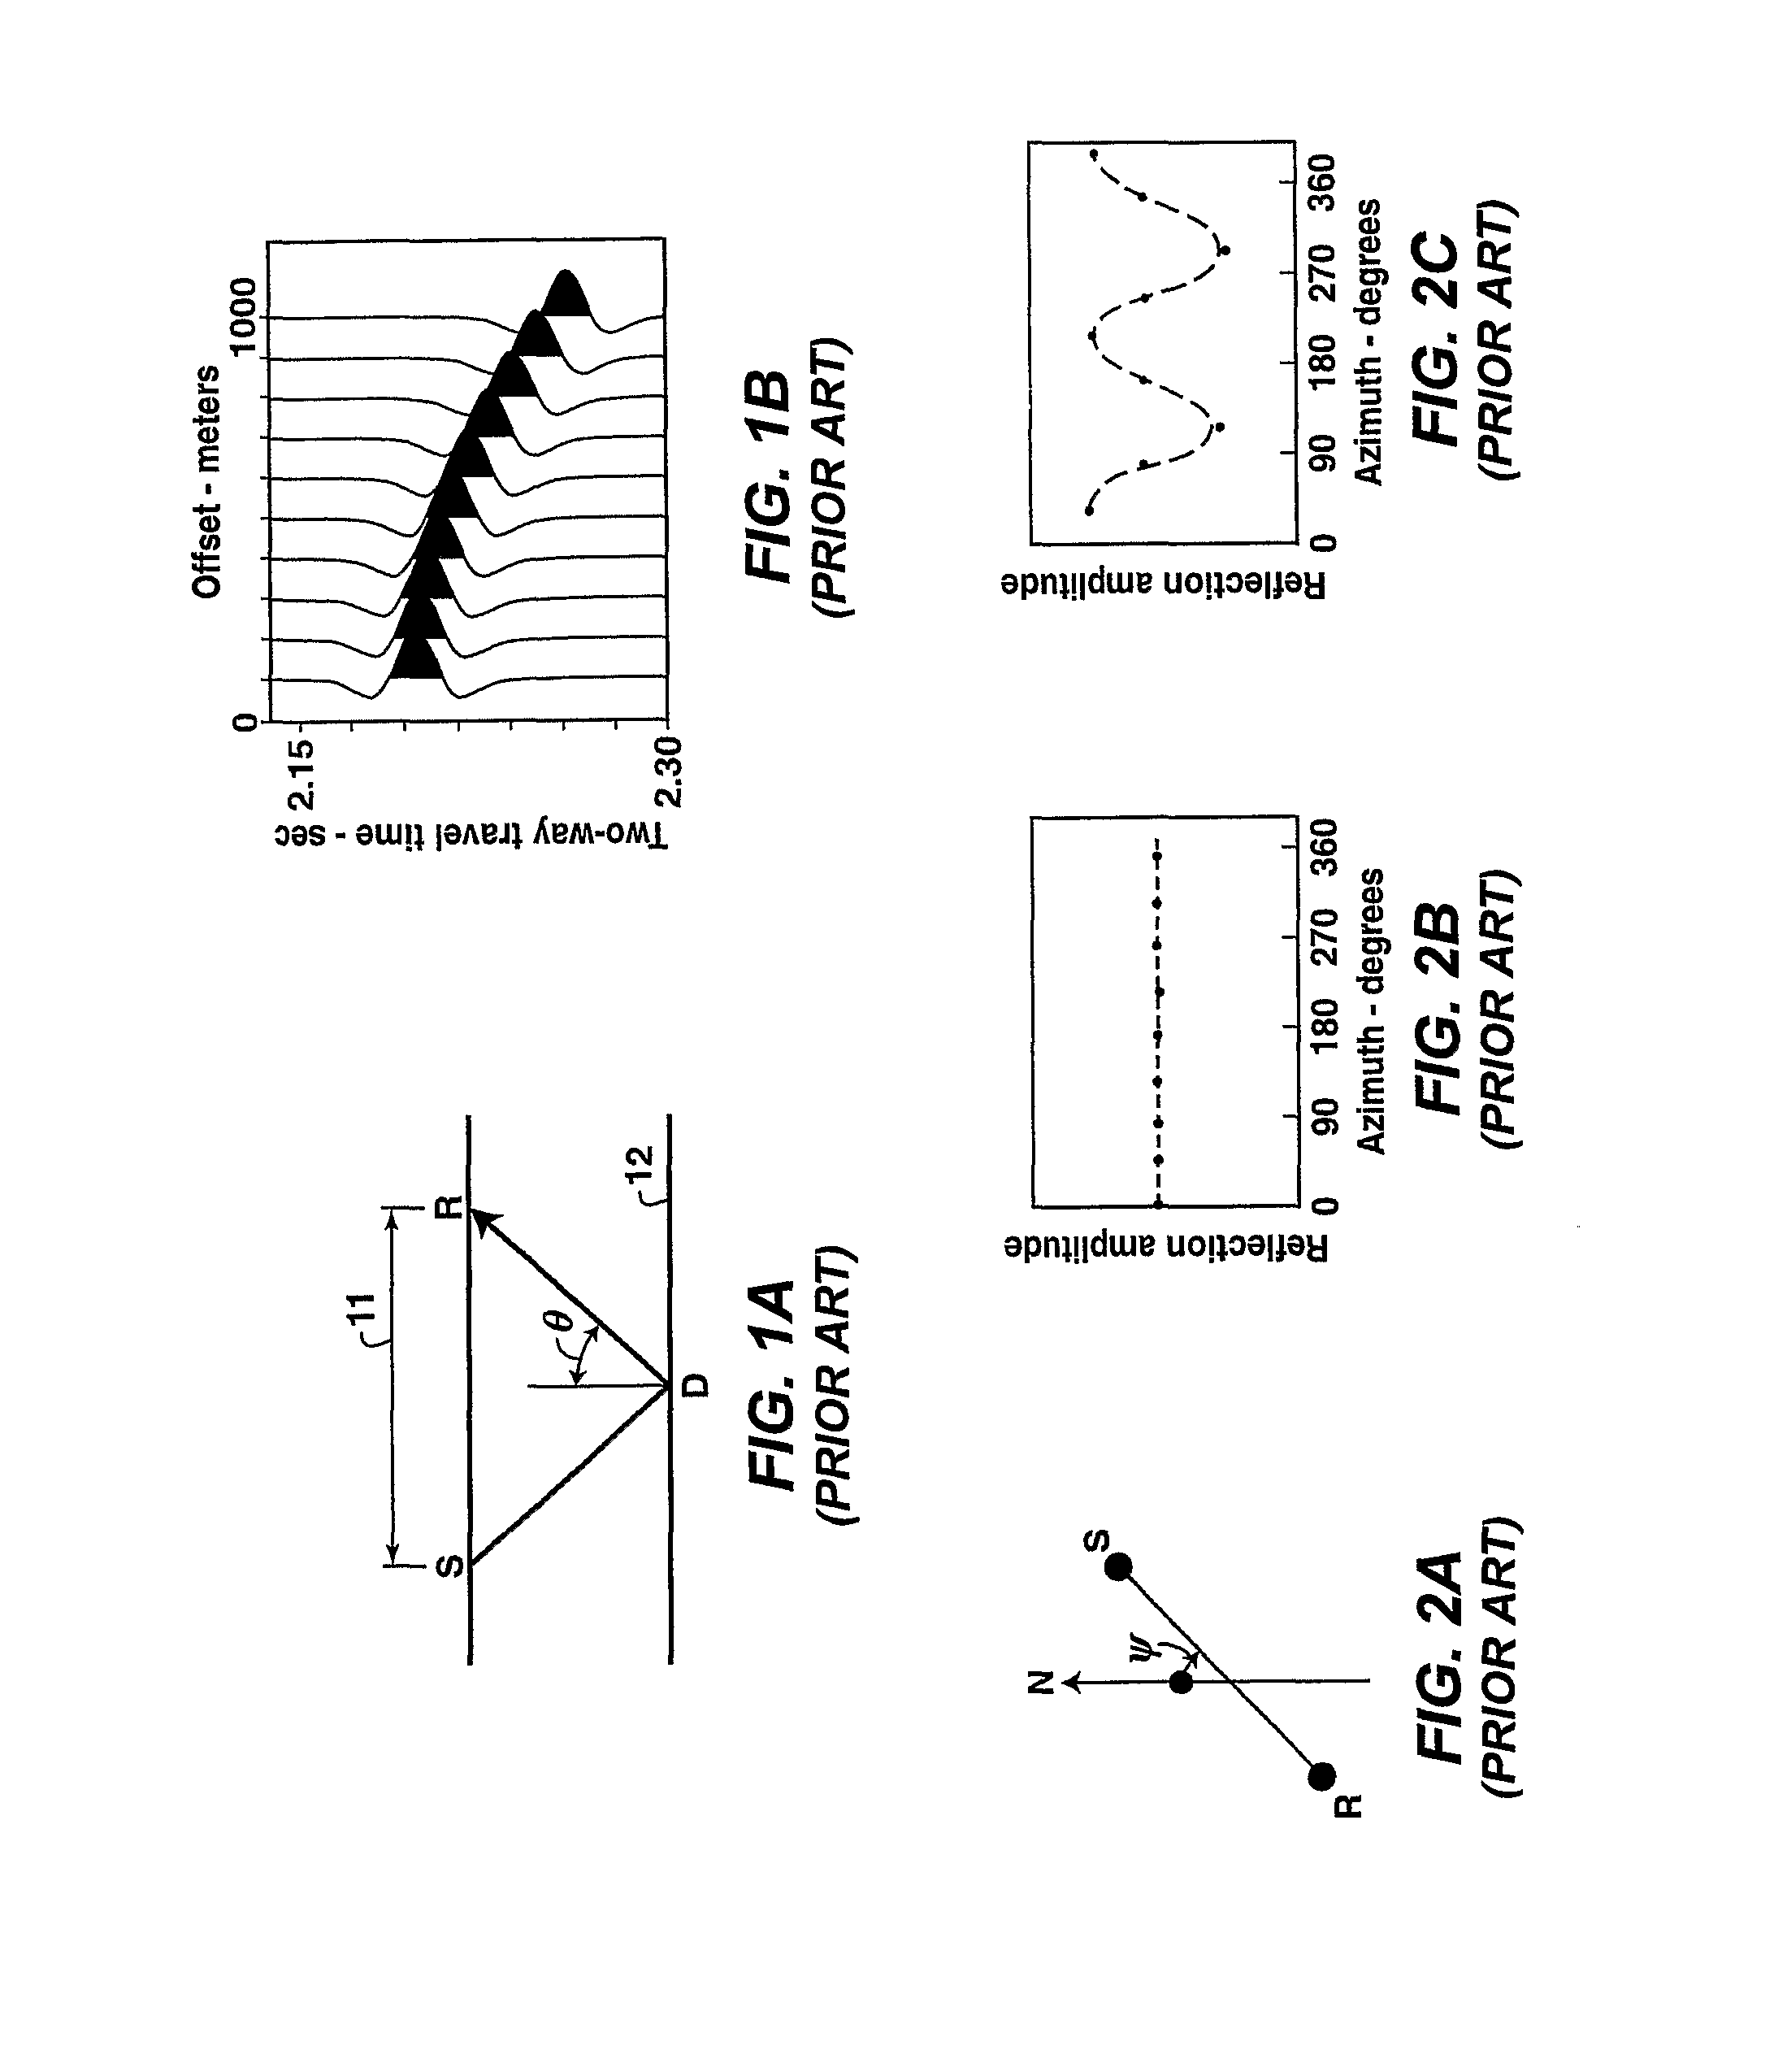 Method for Quantification and Mitigation for Dip-Induced Azimuthal Avo